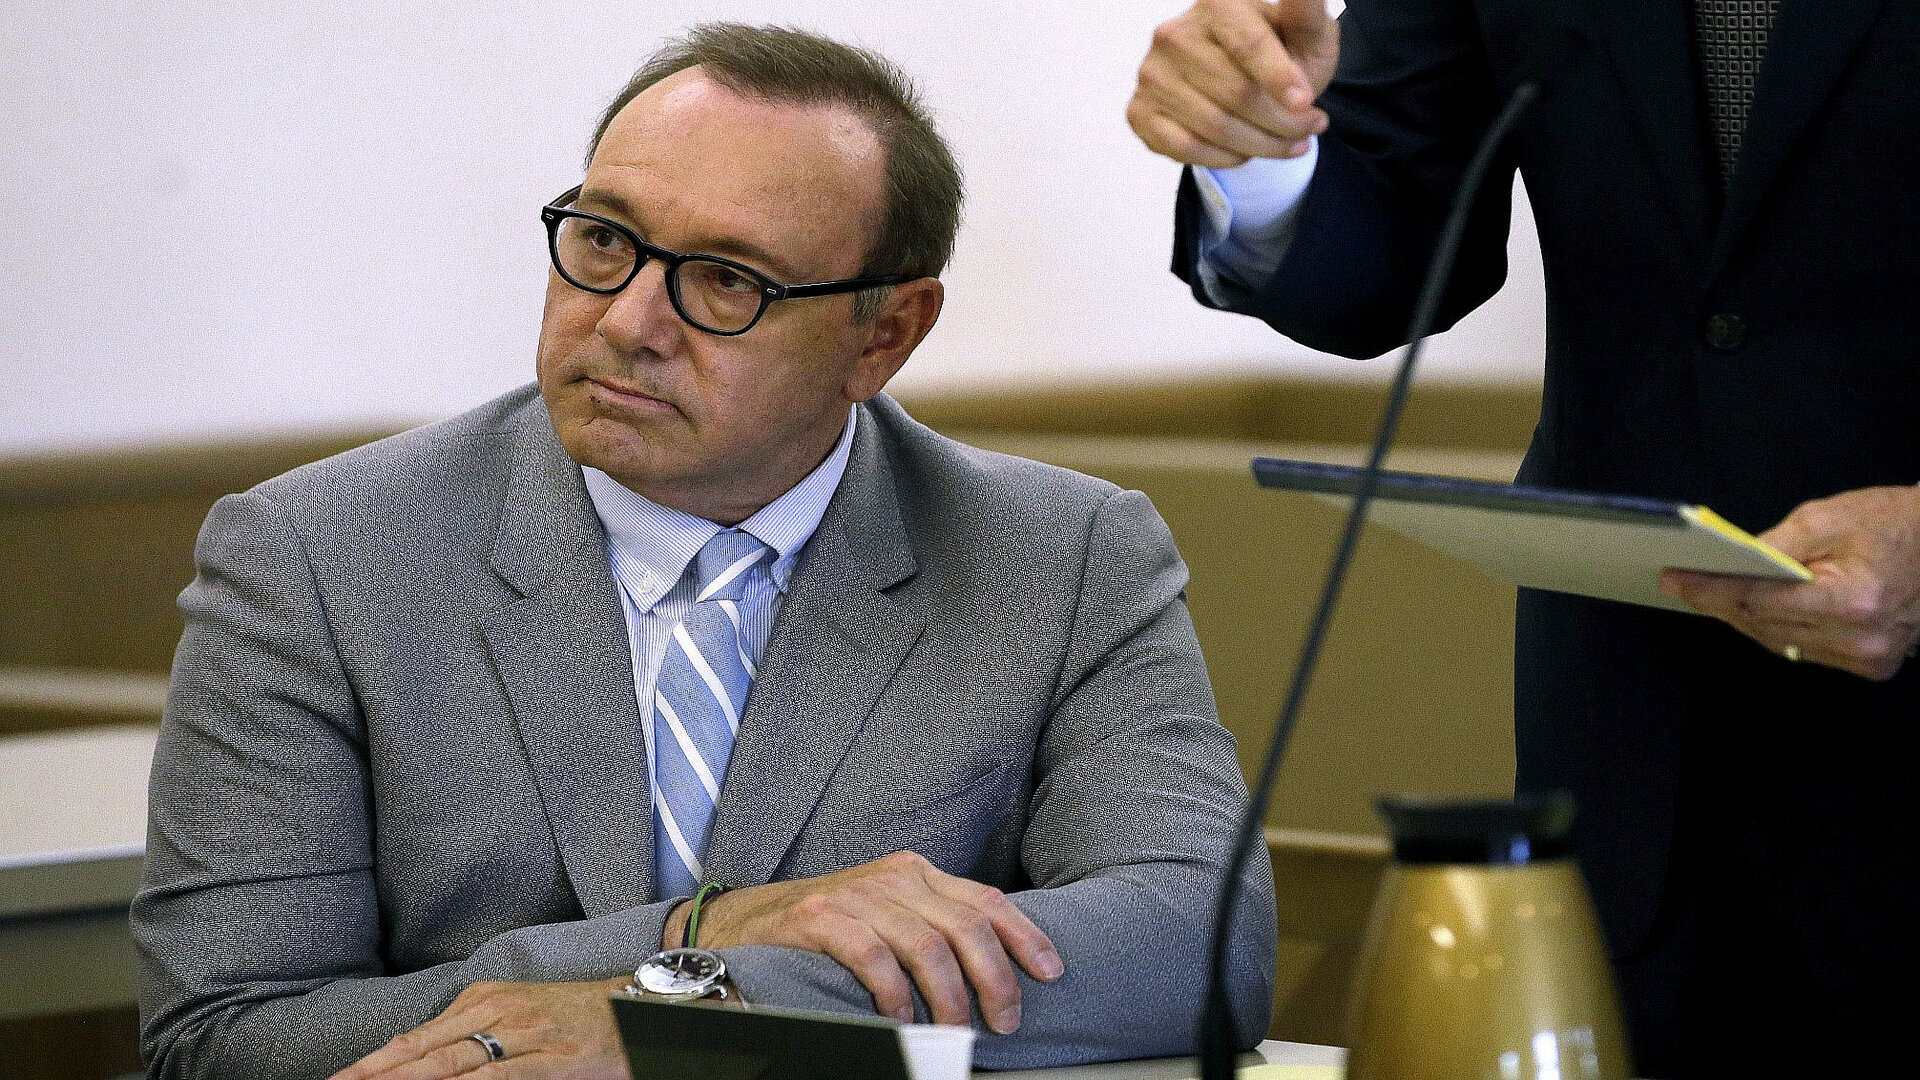 LA court orders actor Kevin Spacey to pay over $30 million to studio for losses